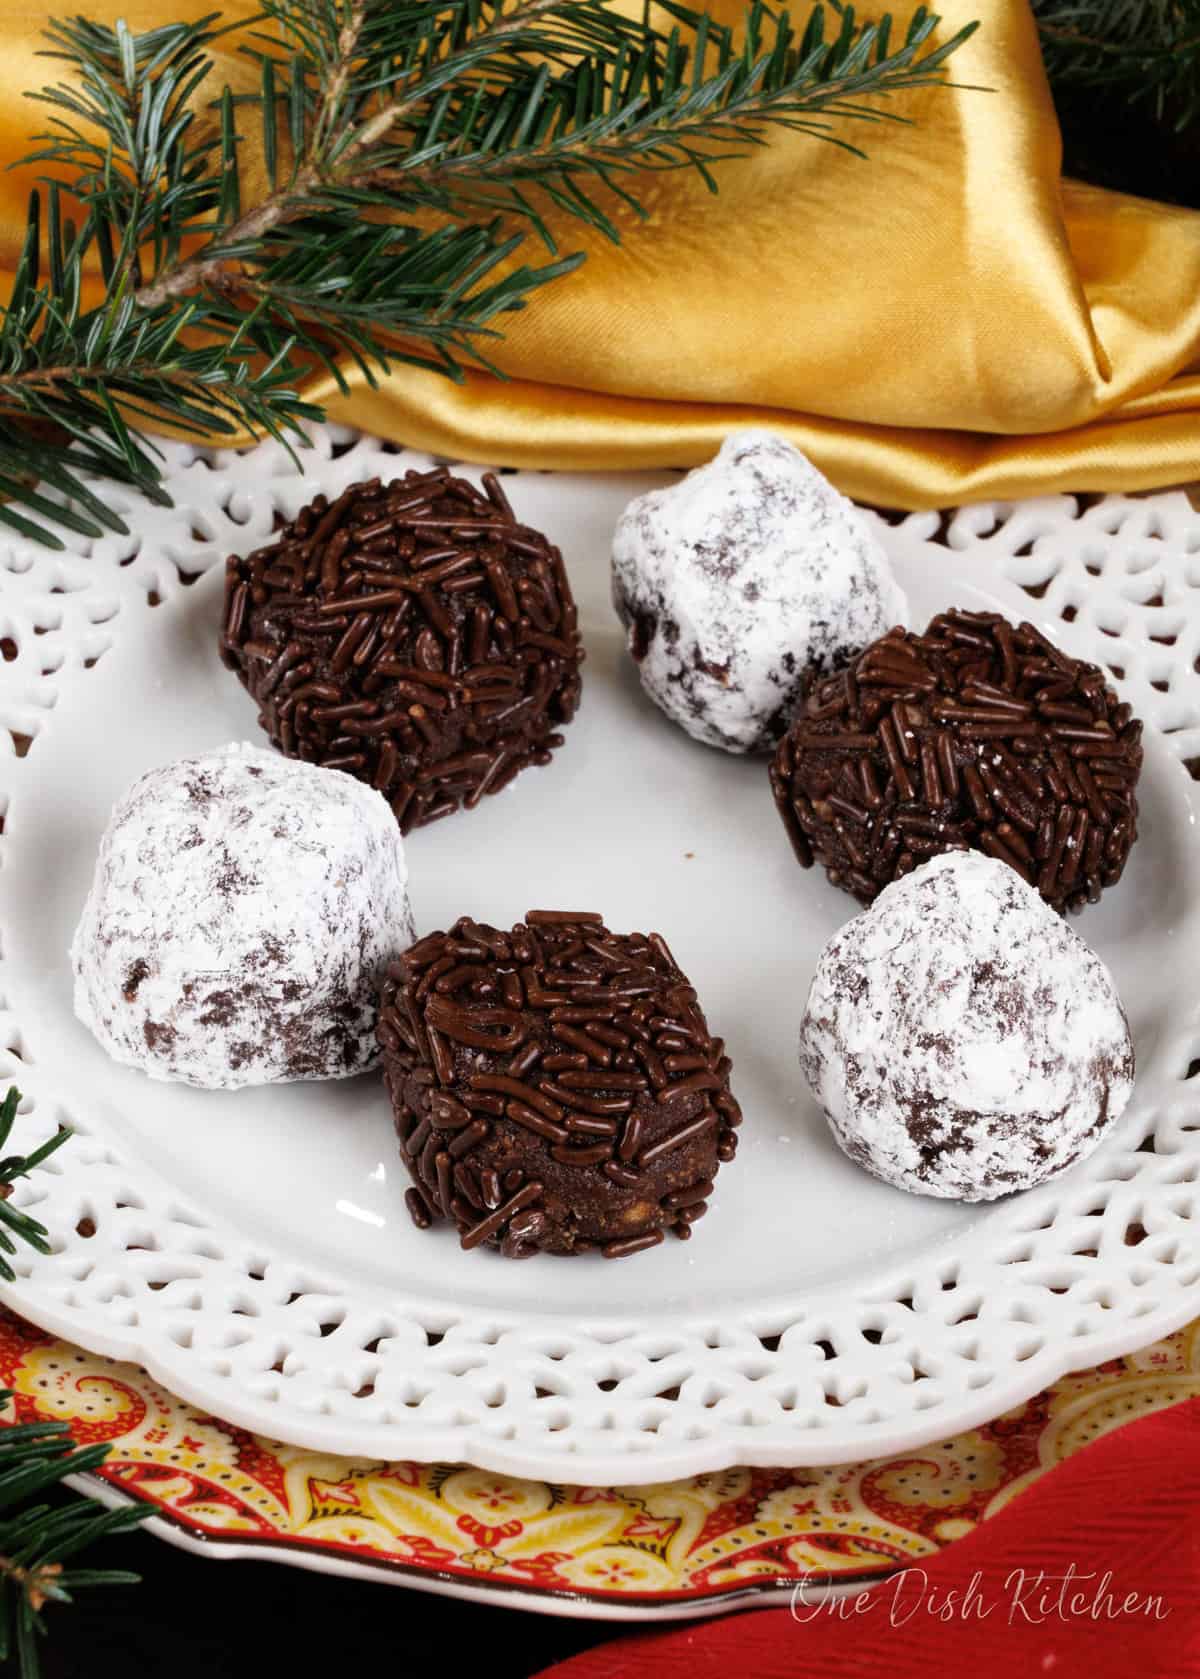 6 rum balls rolled in sprinkles and powdered sugar on a white plate next to a gold napkin and leaves from a tree